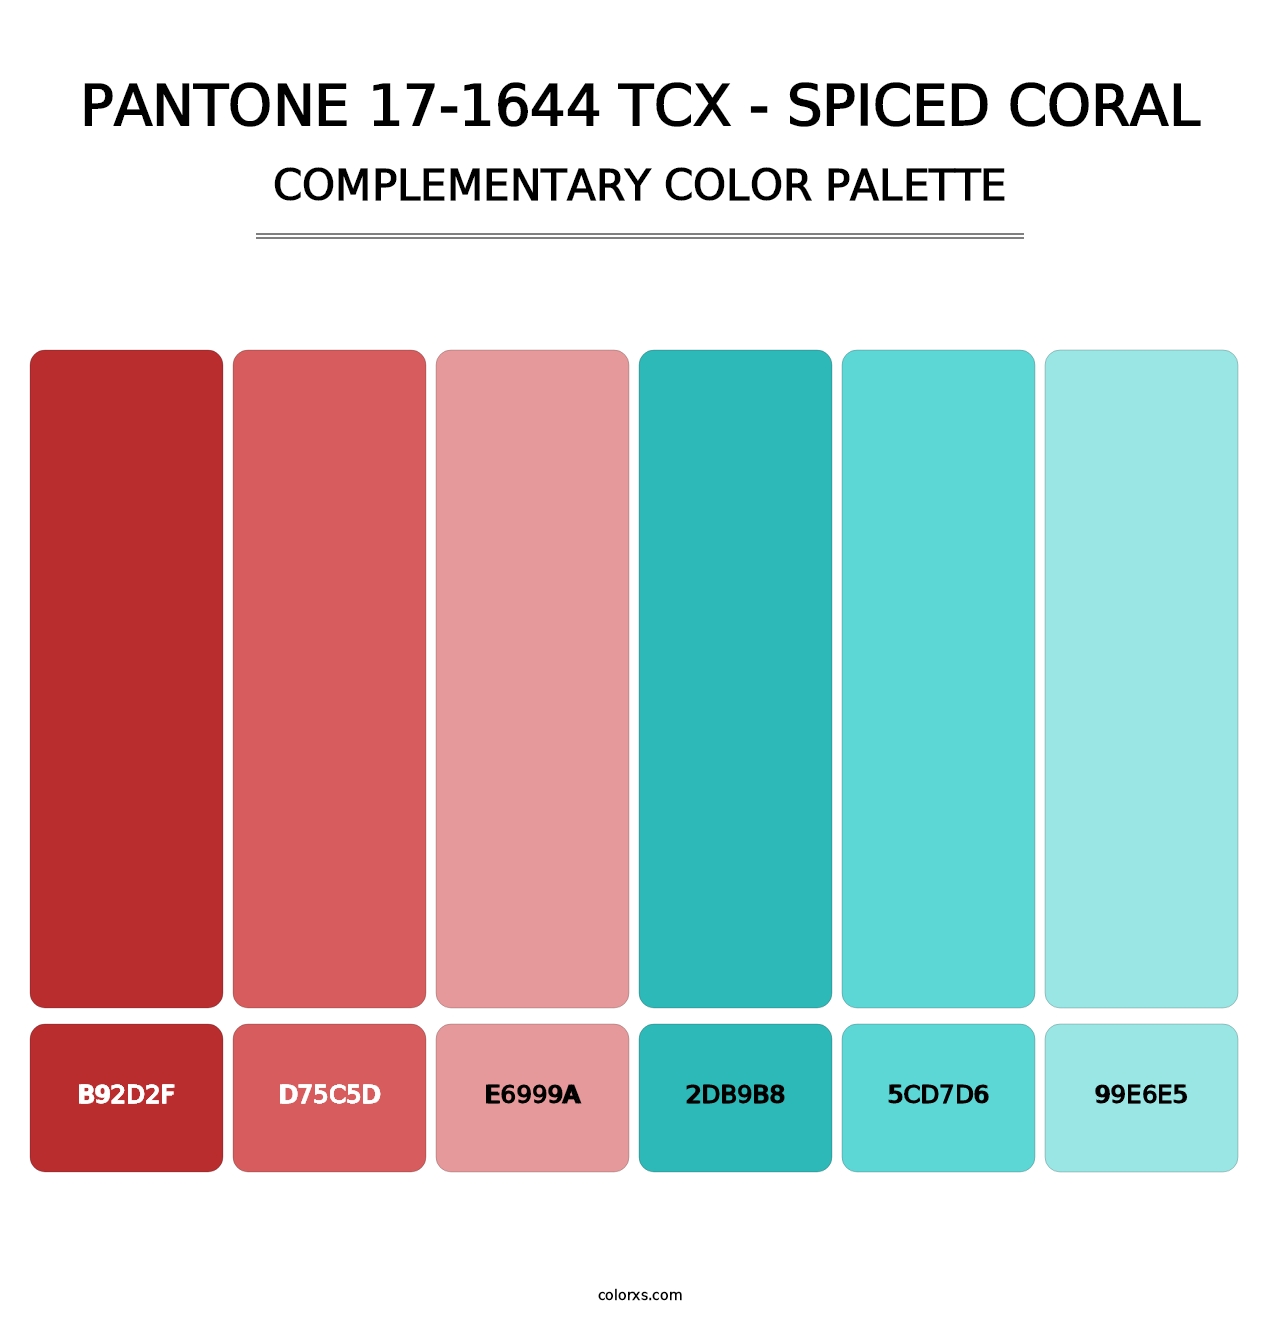 PANTONE 17-1644 TCX - Spiced Coral - Complementary Color Palette